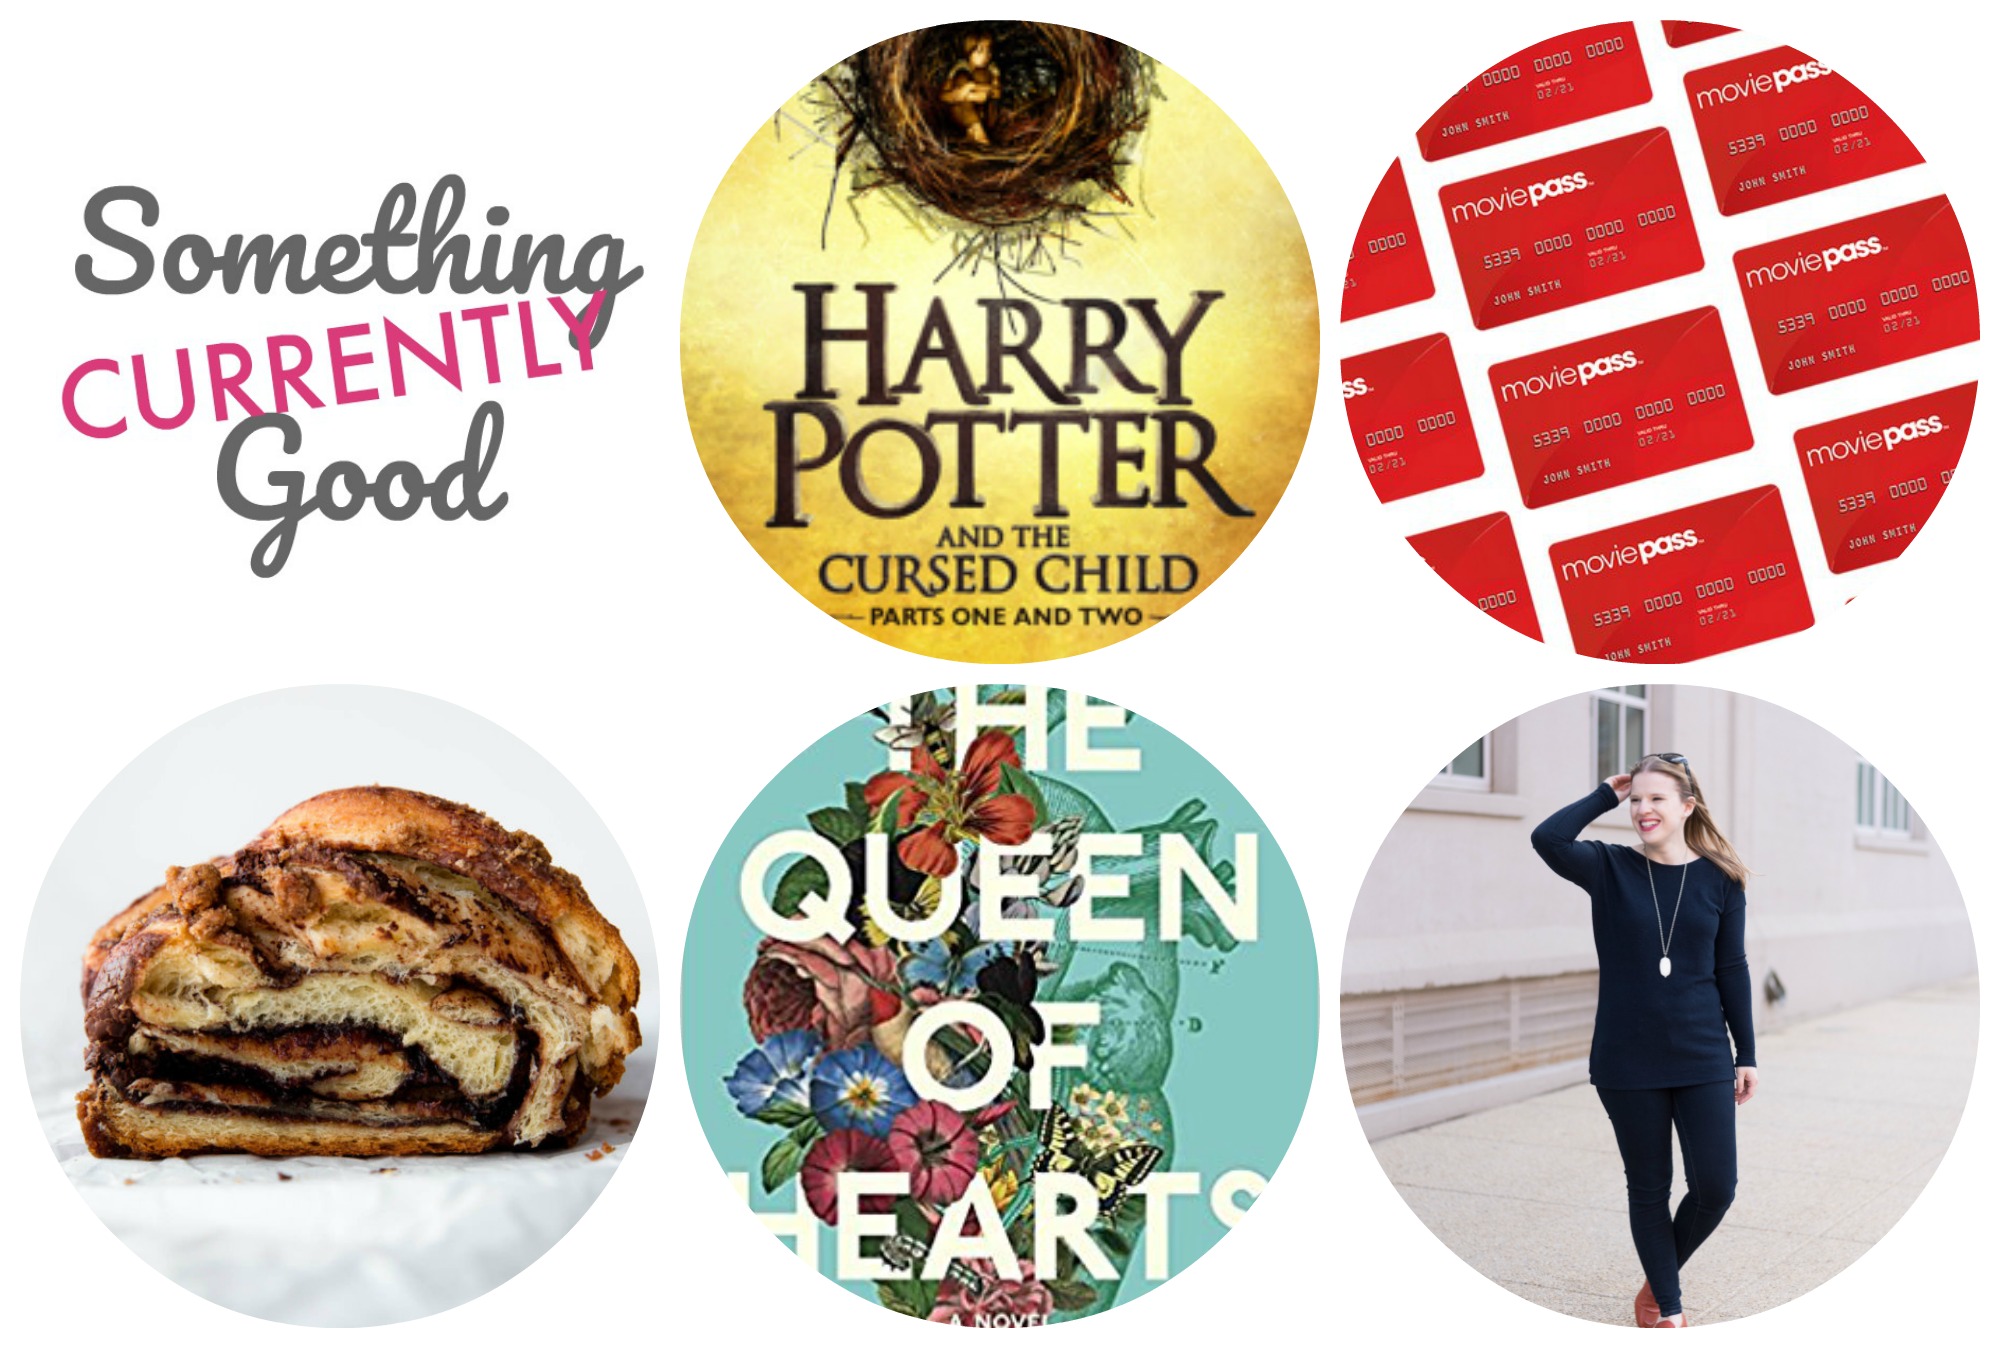 harry potter and the cursed child, moviepass, babka, the queen of hearts book, something good blog, j.crew reversible sweater